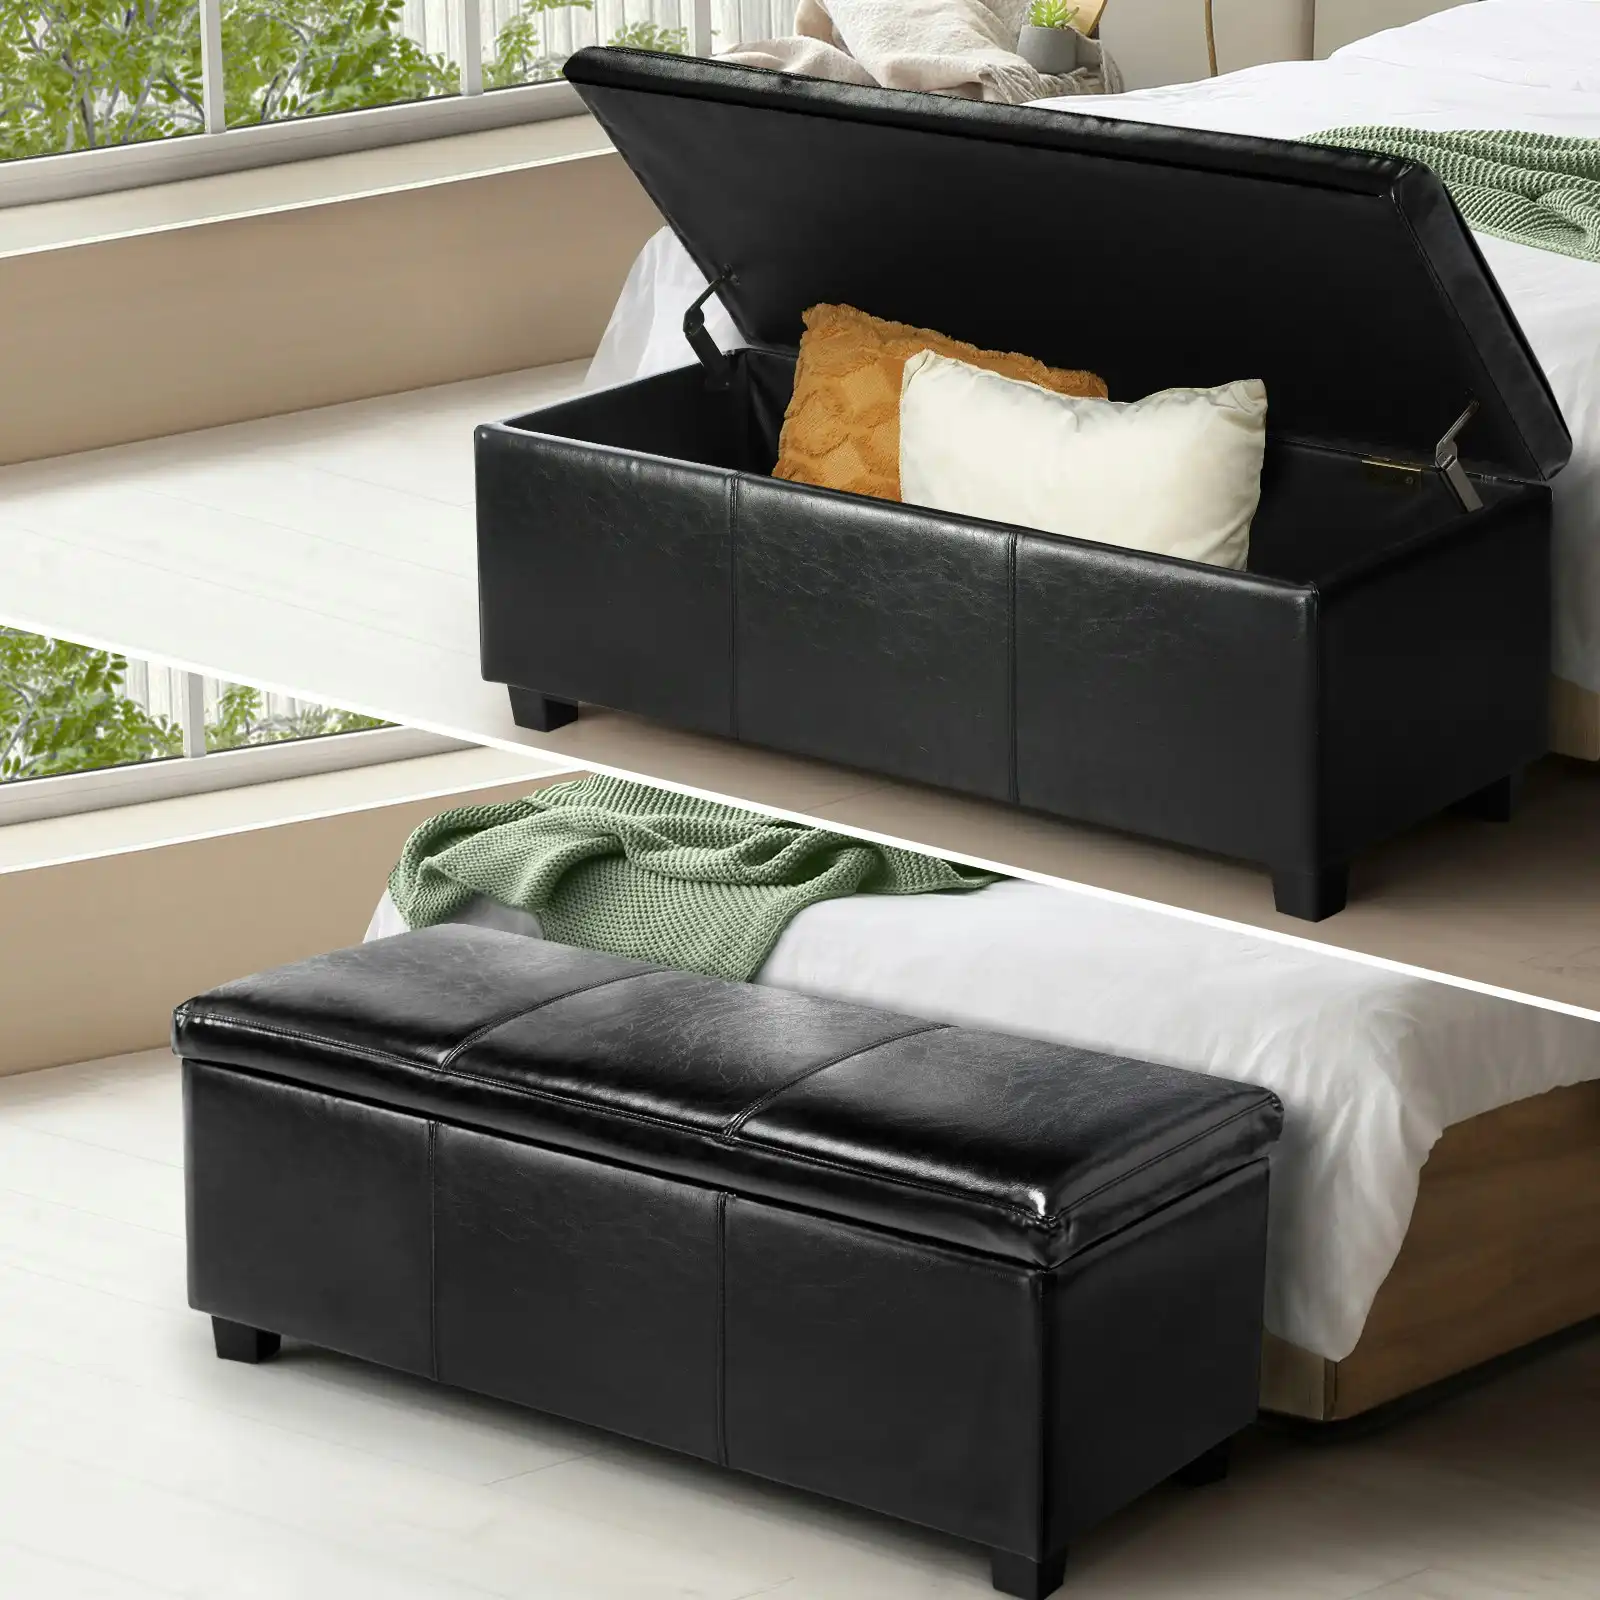 Oikiture Storage Ottoman Blanket Box PU Leather Arm Foot Stool Couch Large